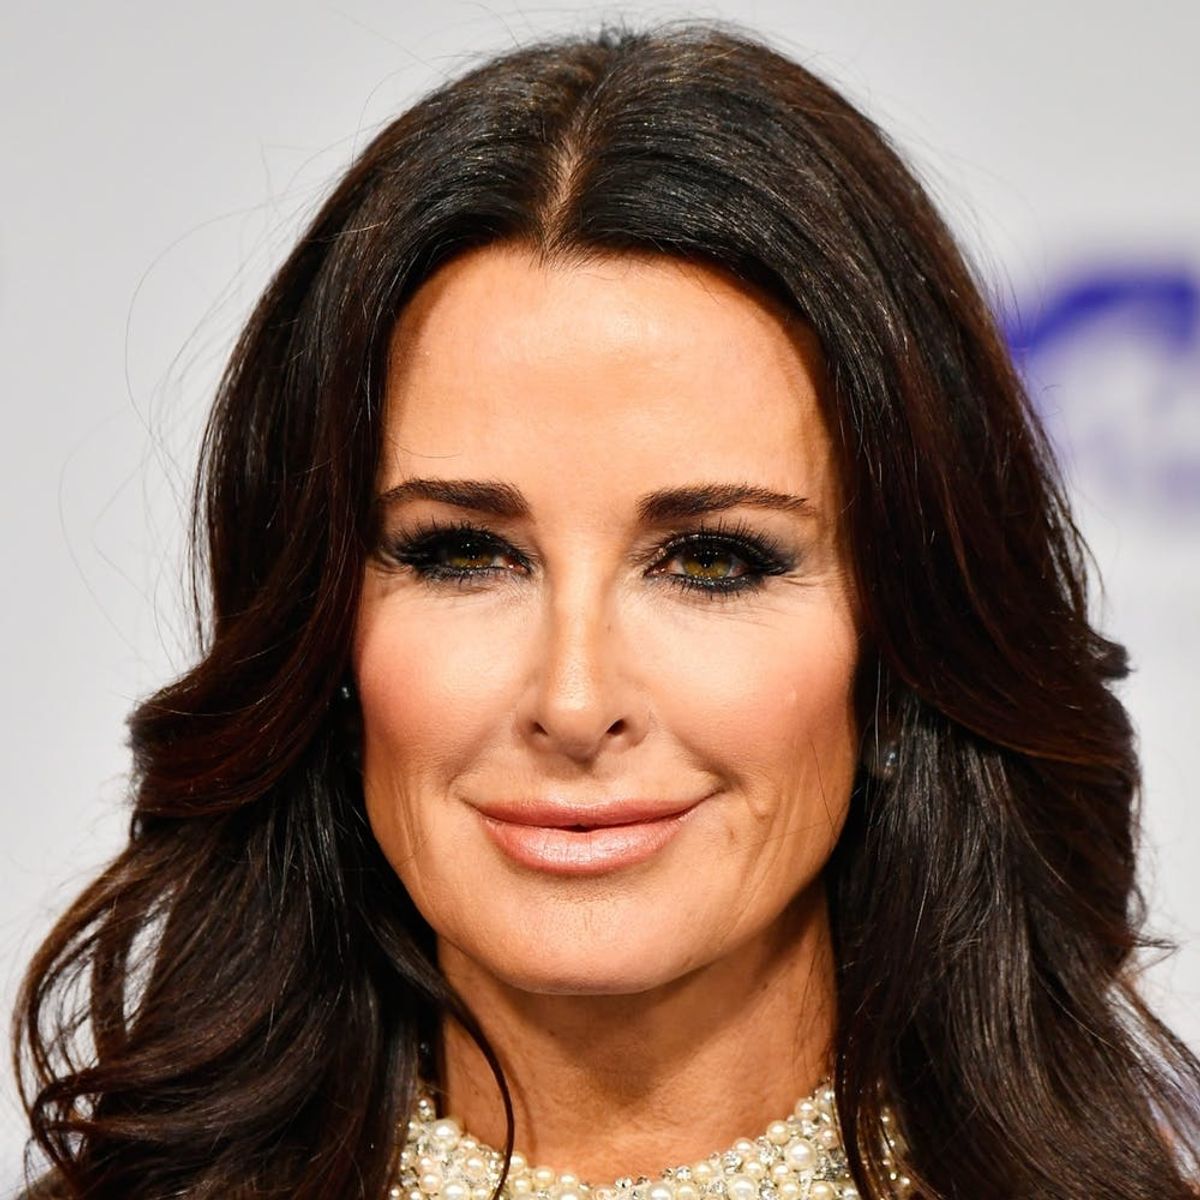 Kyle Richards Umansky’s Home Was Robbed of More Than $1 Million in Jewels